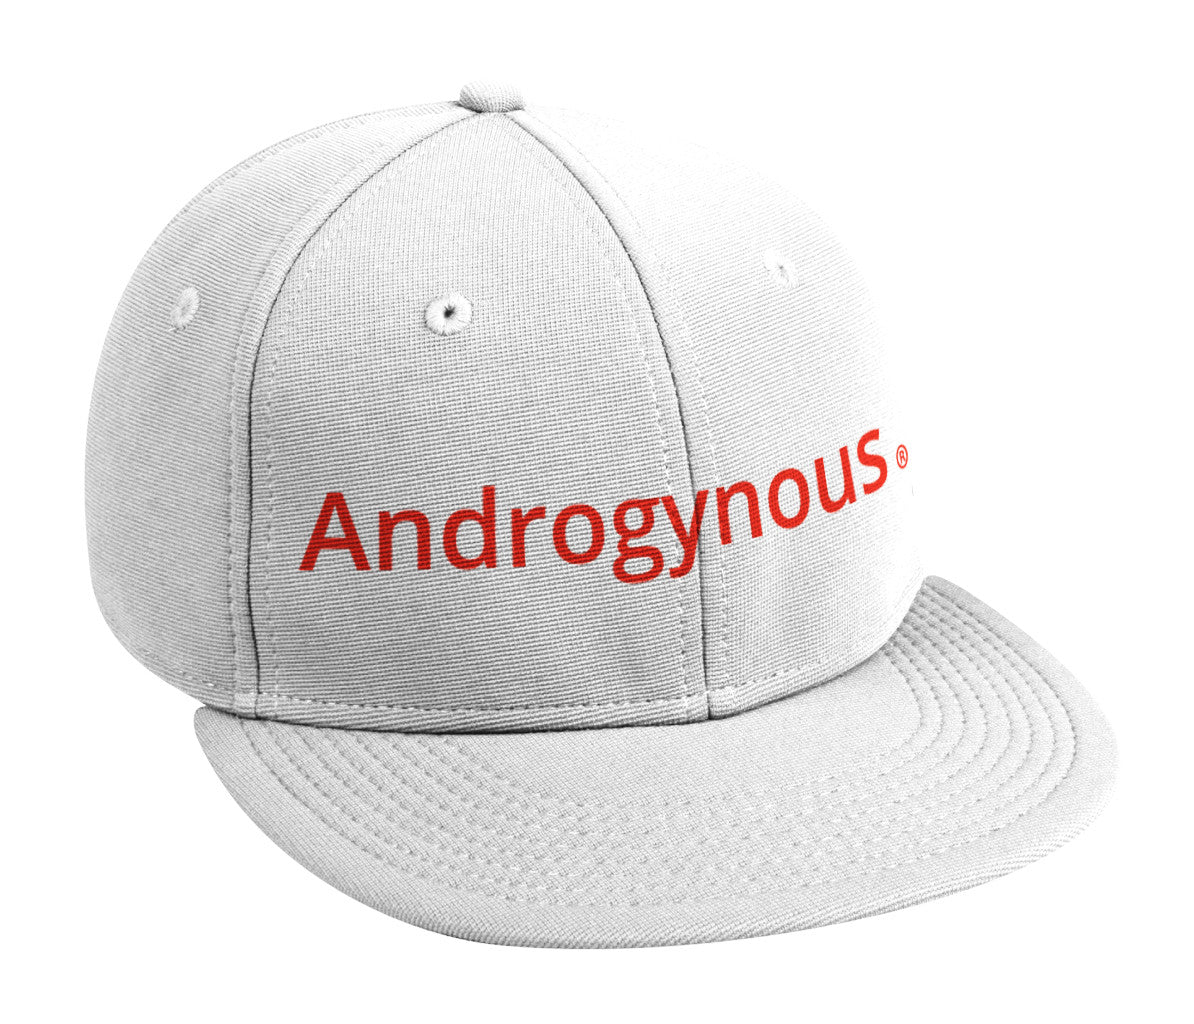 ANDROGYNOUS RED ON WHITE PRINTED -6 PANEL - COTTON CAP